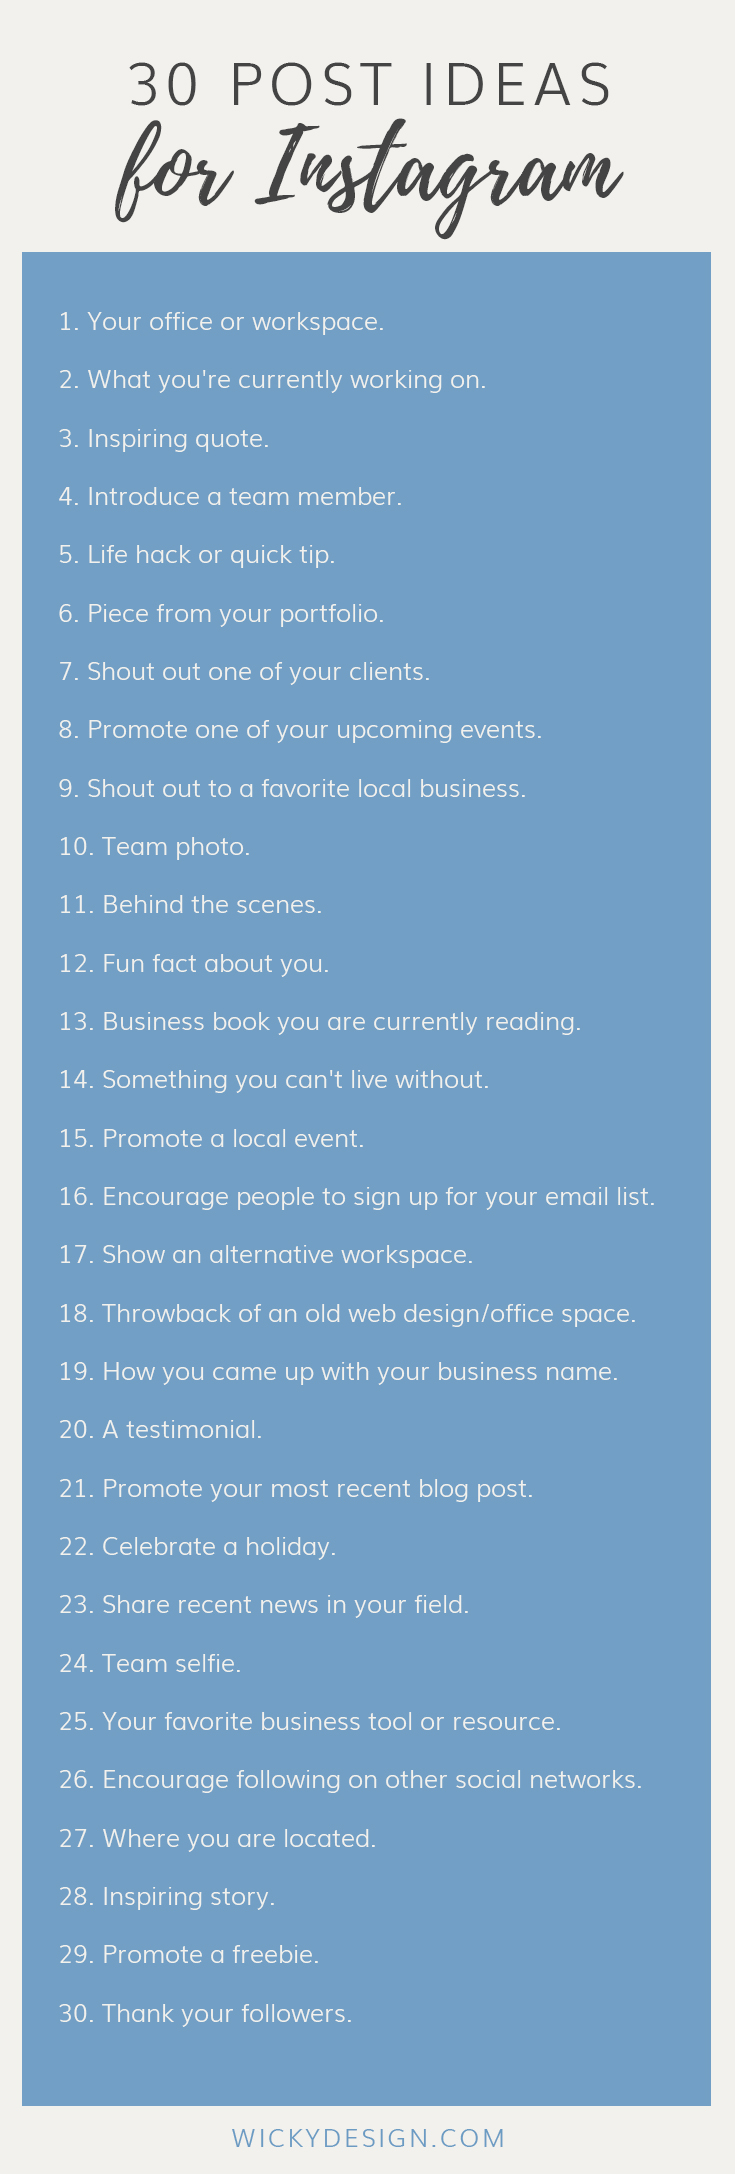 30-post-ideas-for-instagram-resources